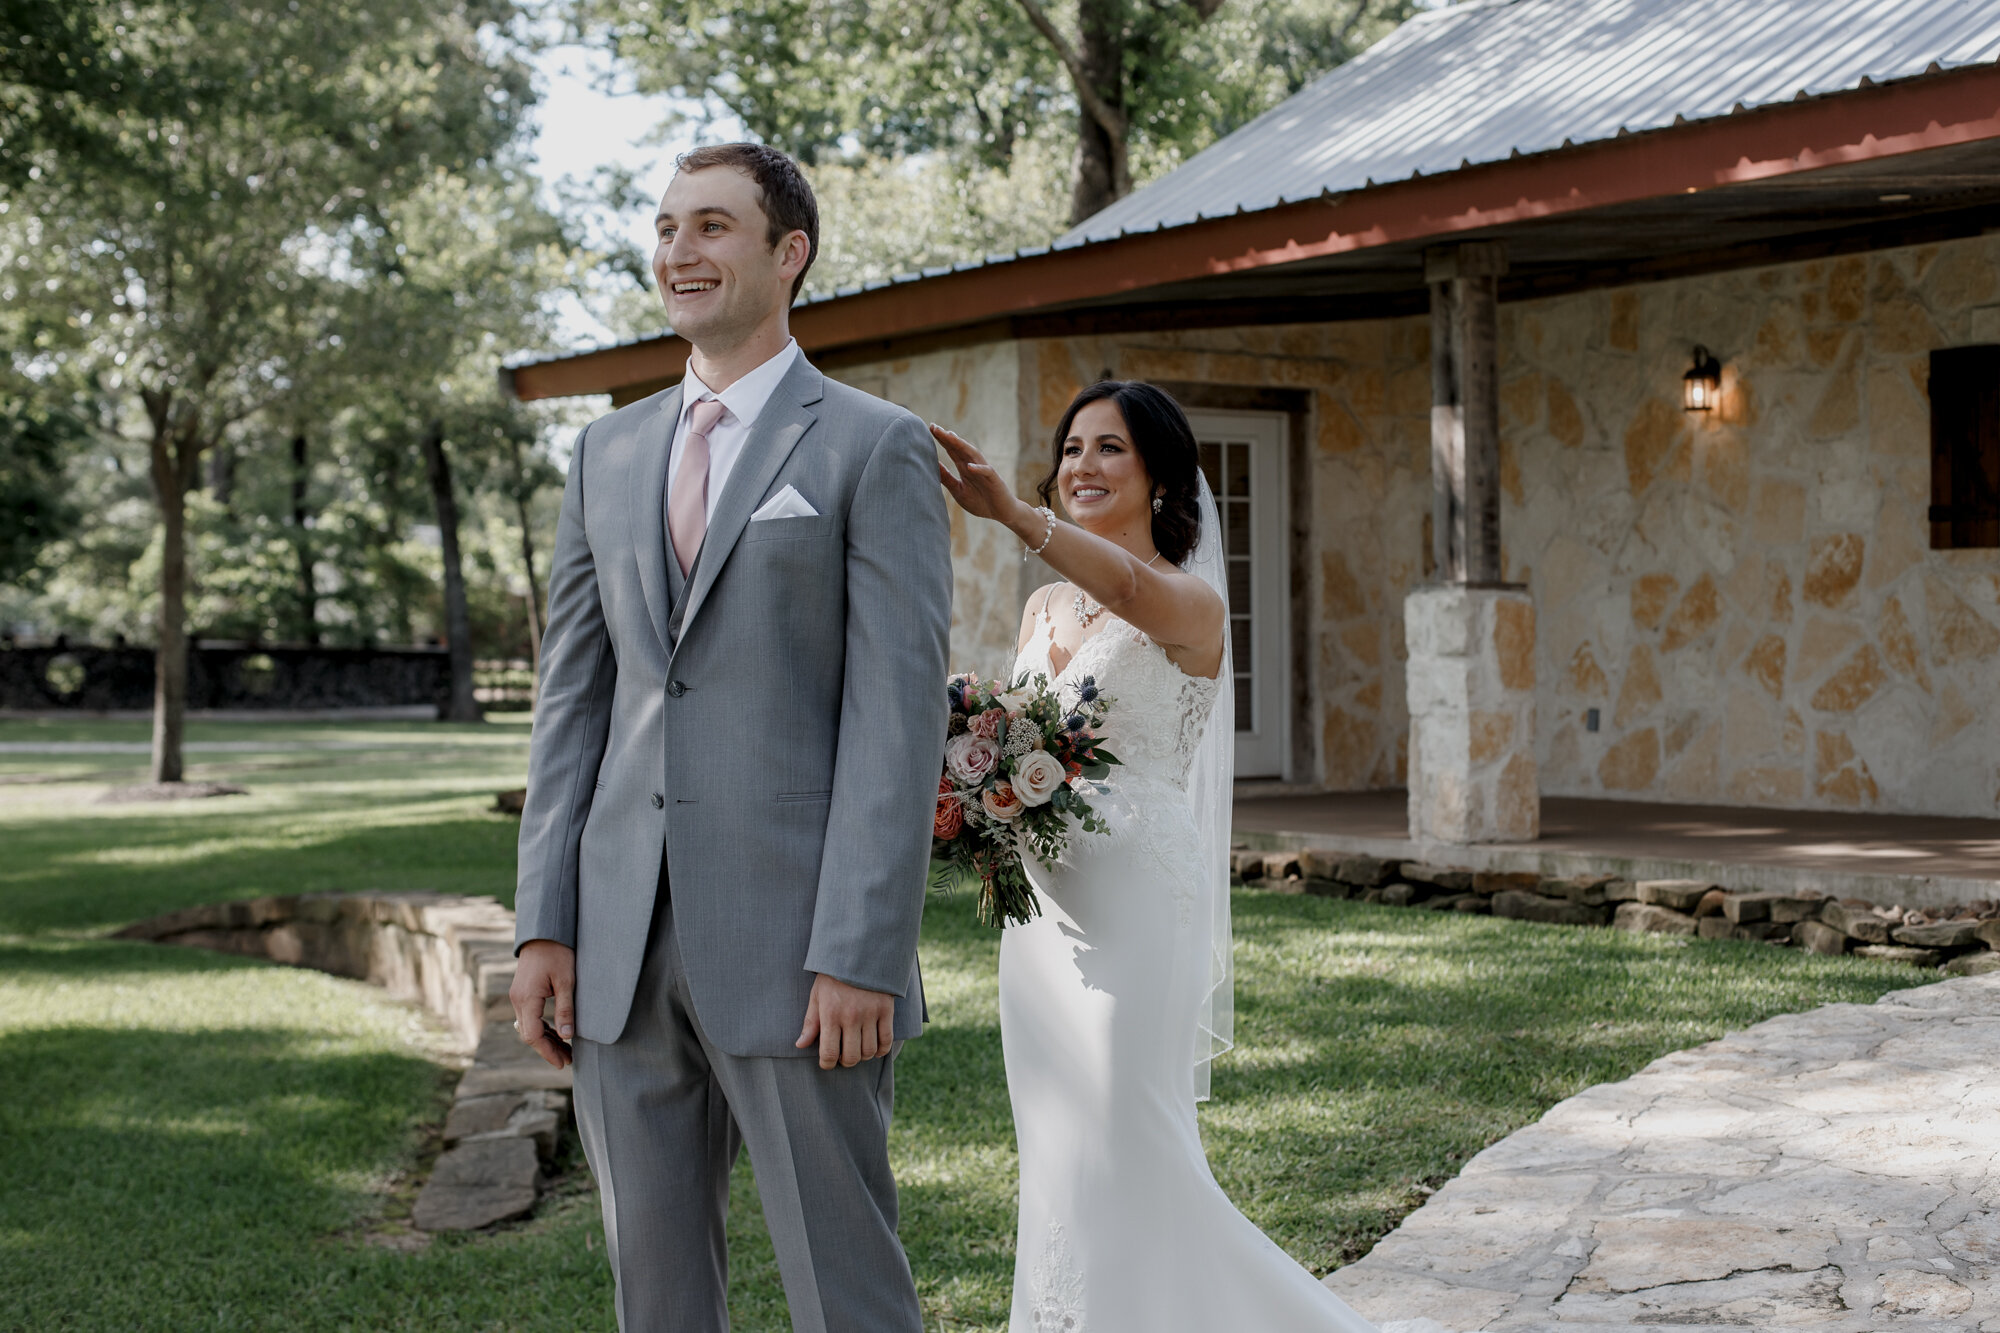 Bride and groom first look. Romantic Chic Country Wedding at Rustic Luxury Balmorhea Events&nbsp;Venue in Magnolia, TX